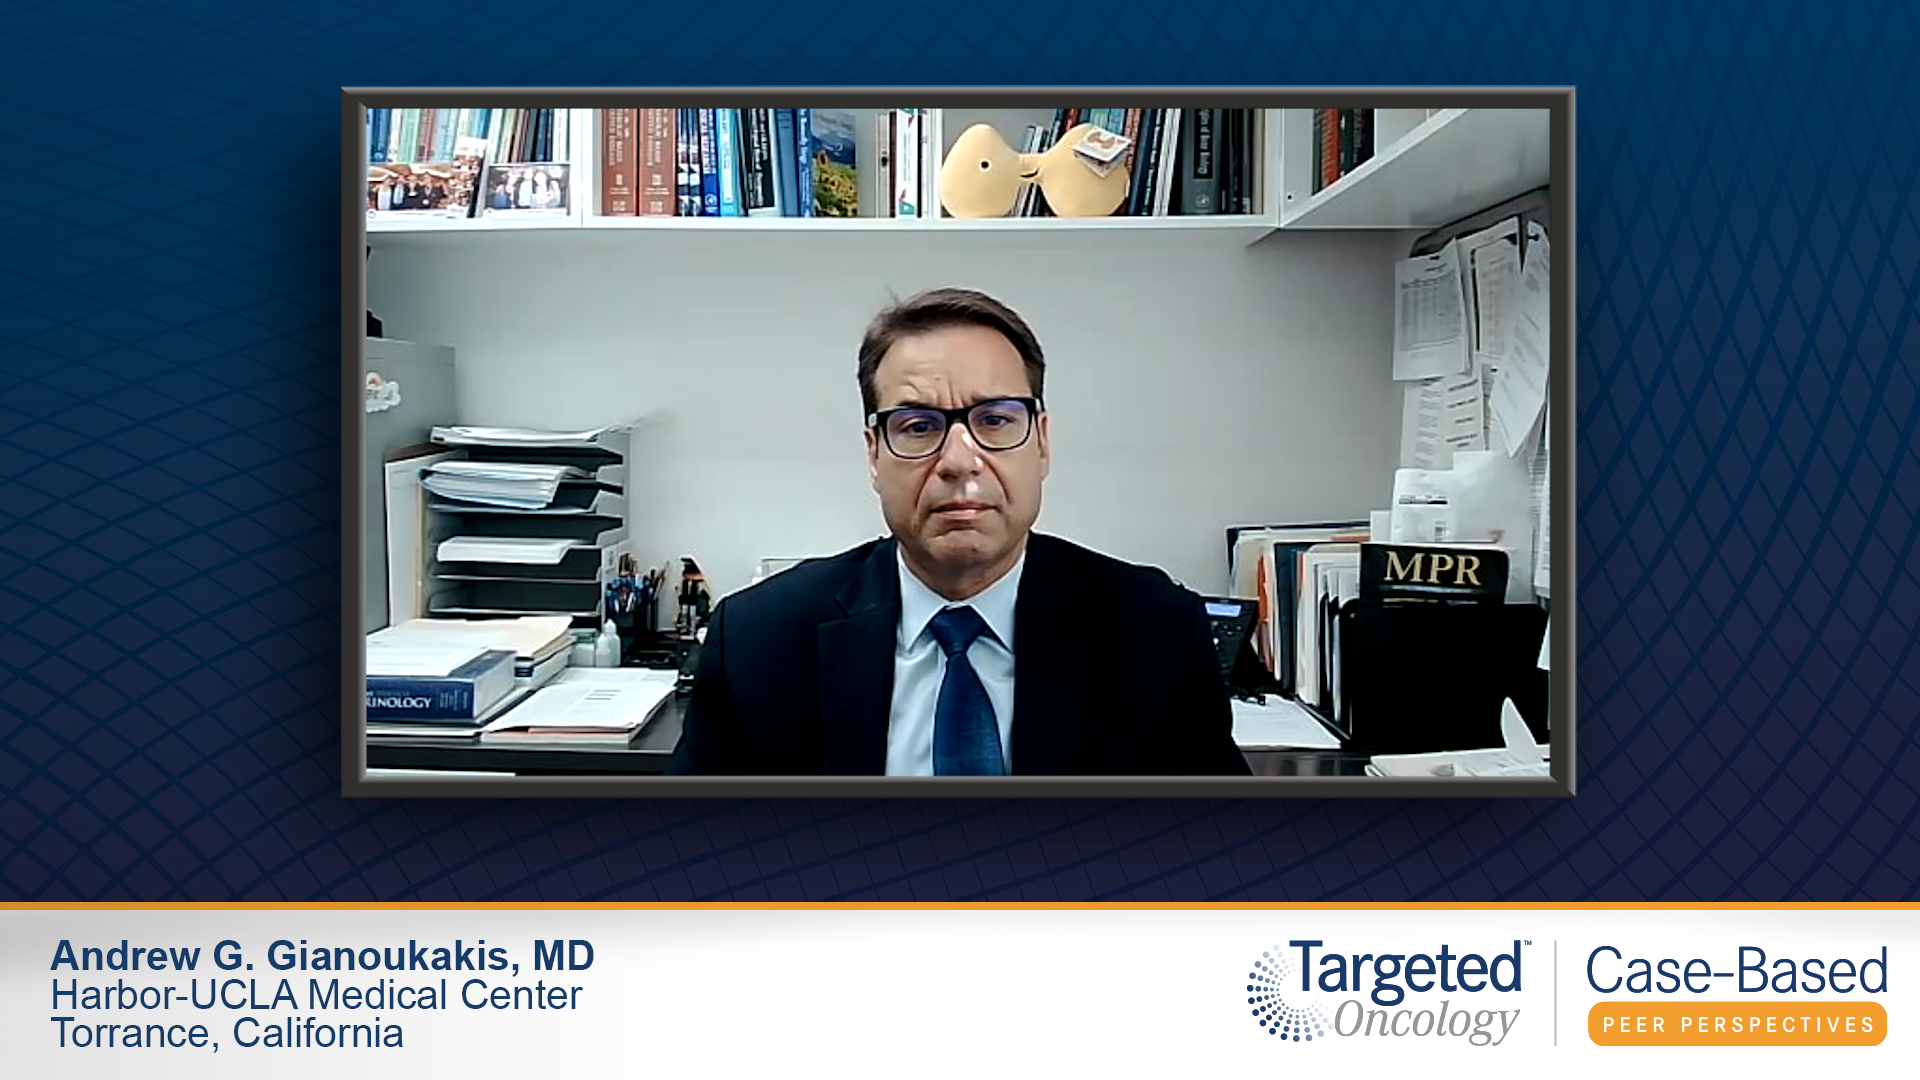 Recommendations for Treating Patients With DTC